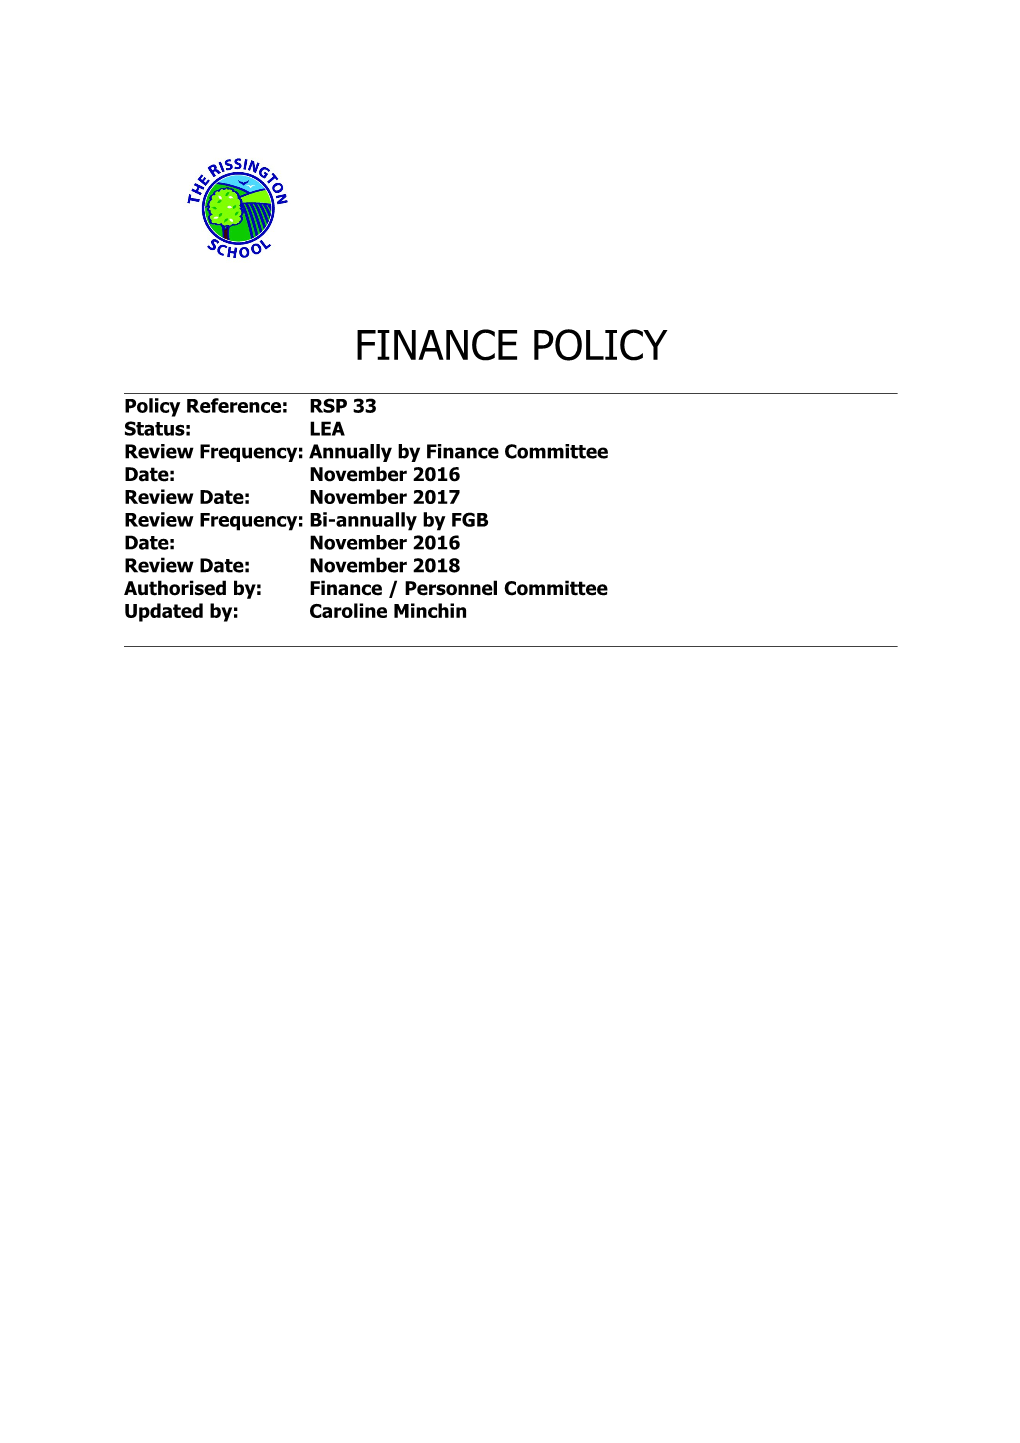 Review Frequency:Annually by Finance Committee